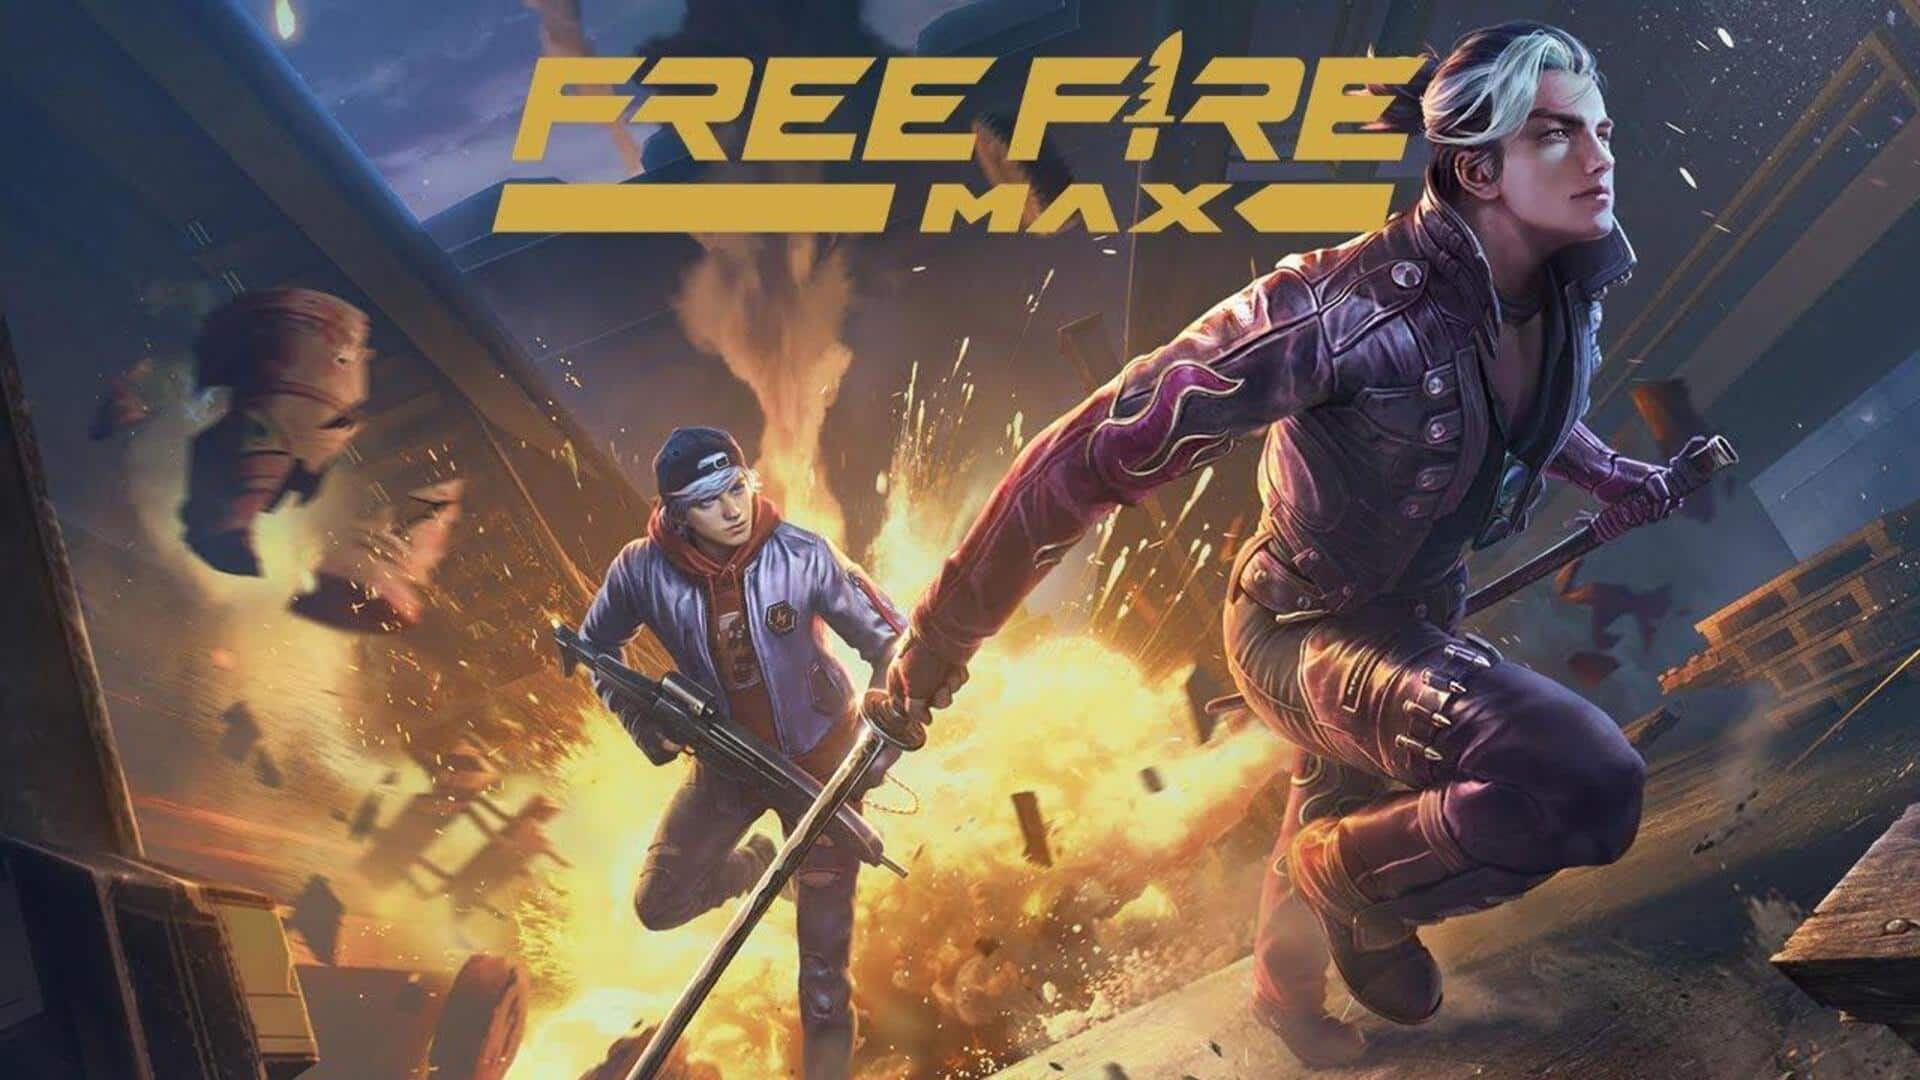 Free Fire MAX codes for April 11: How to redeem